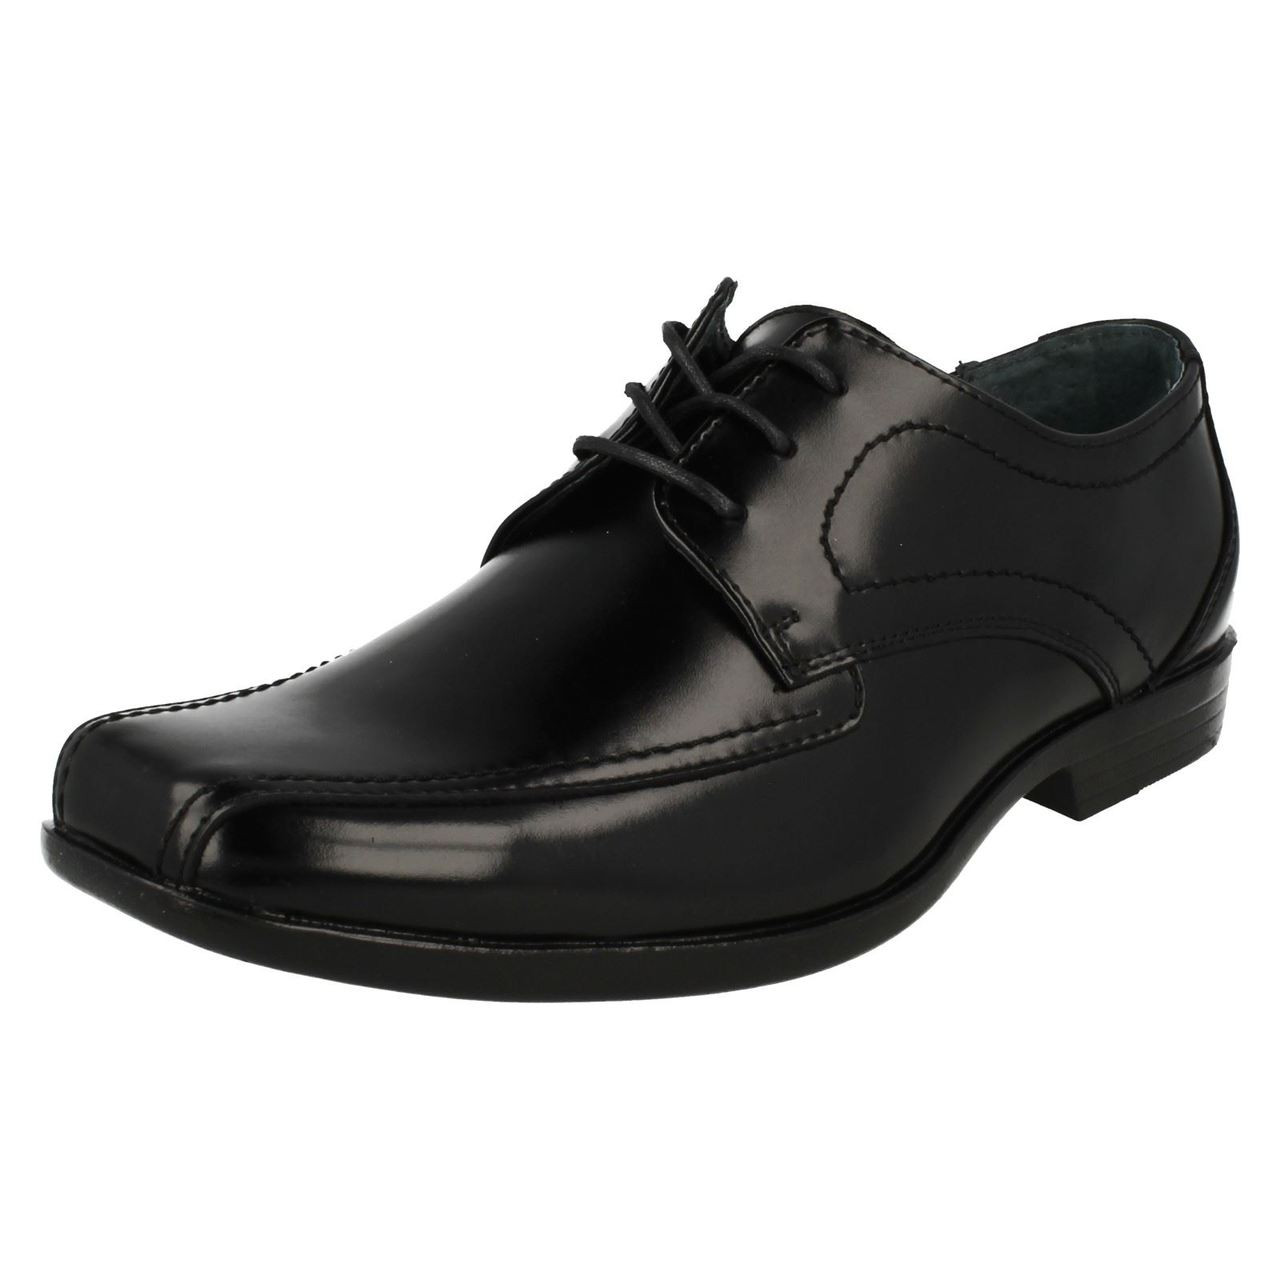 Clancy Sige Særlig Mens Hush Puppies Formal Lace Up Shoes Easton Ralston